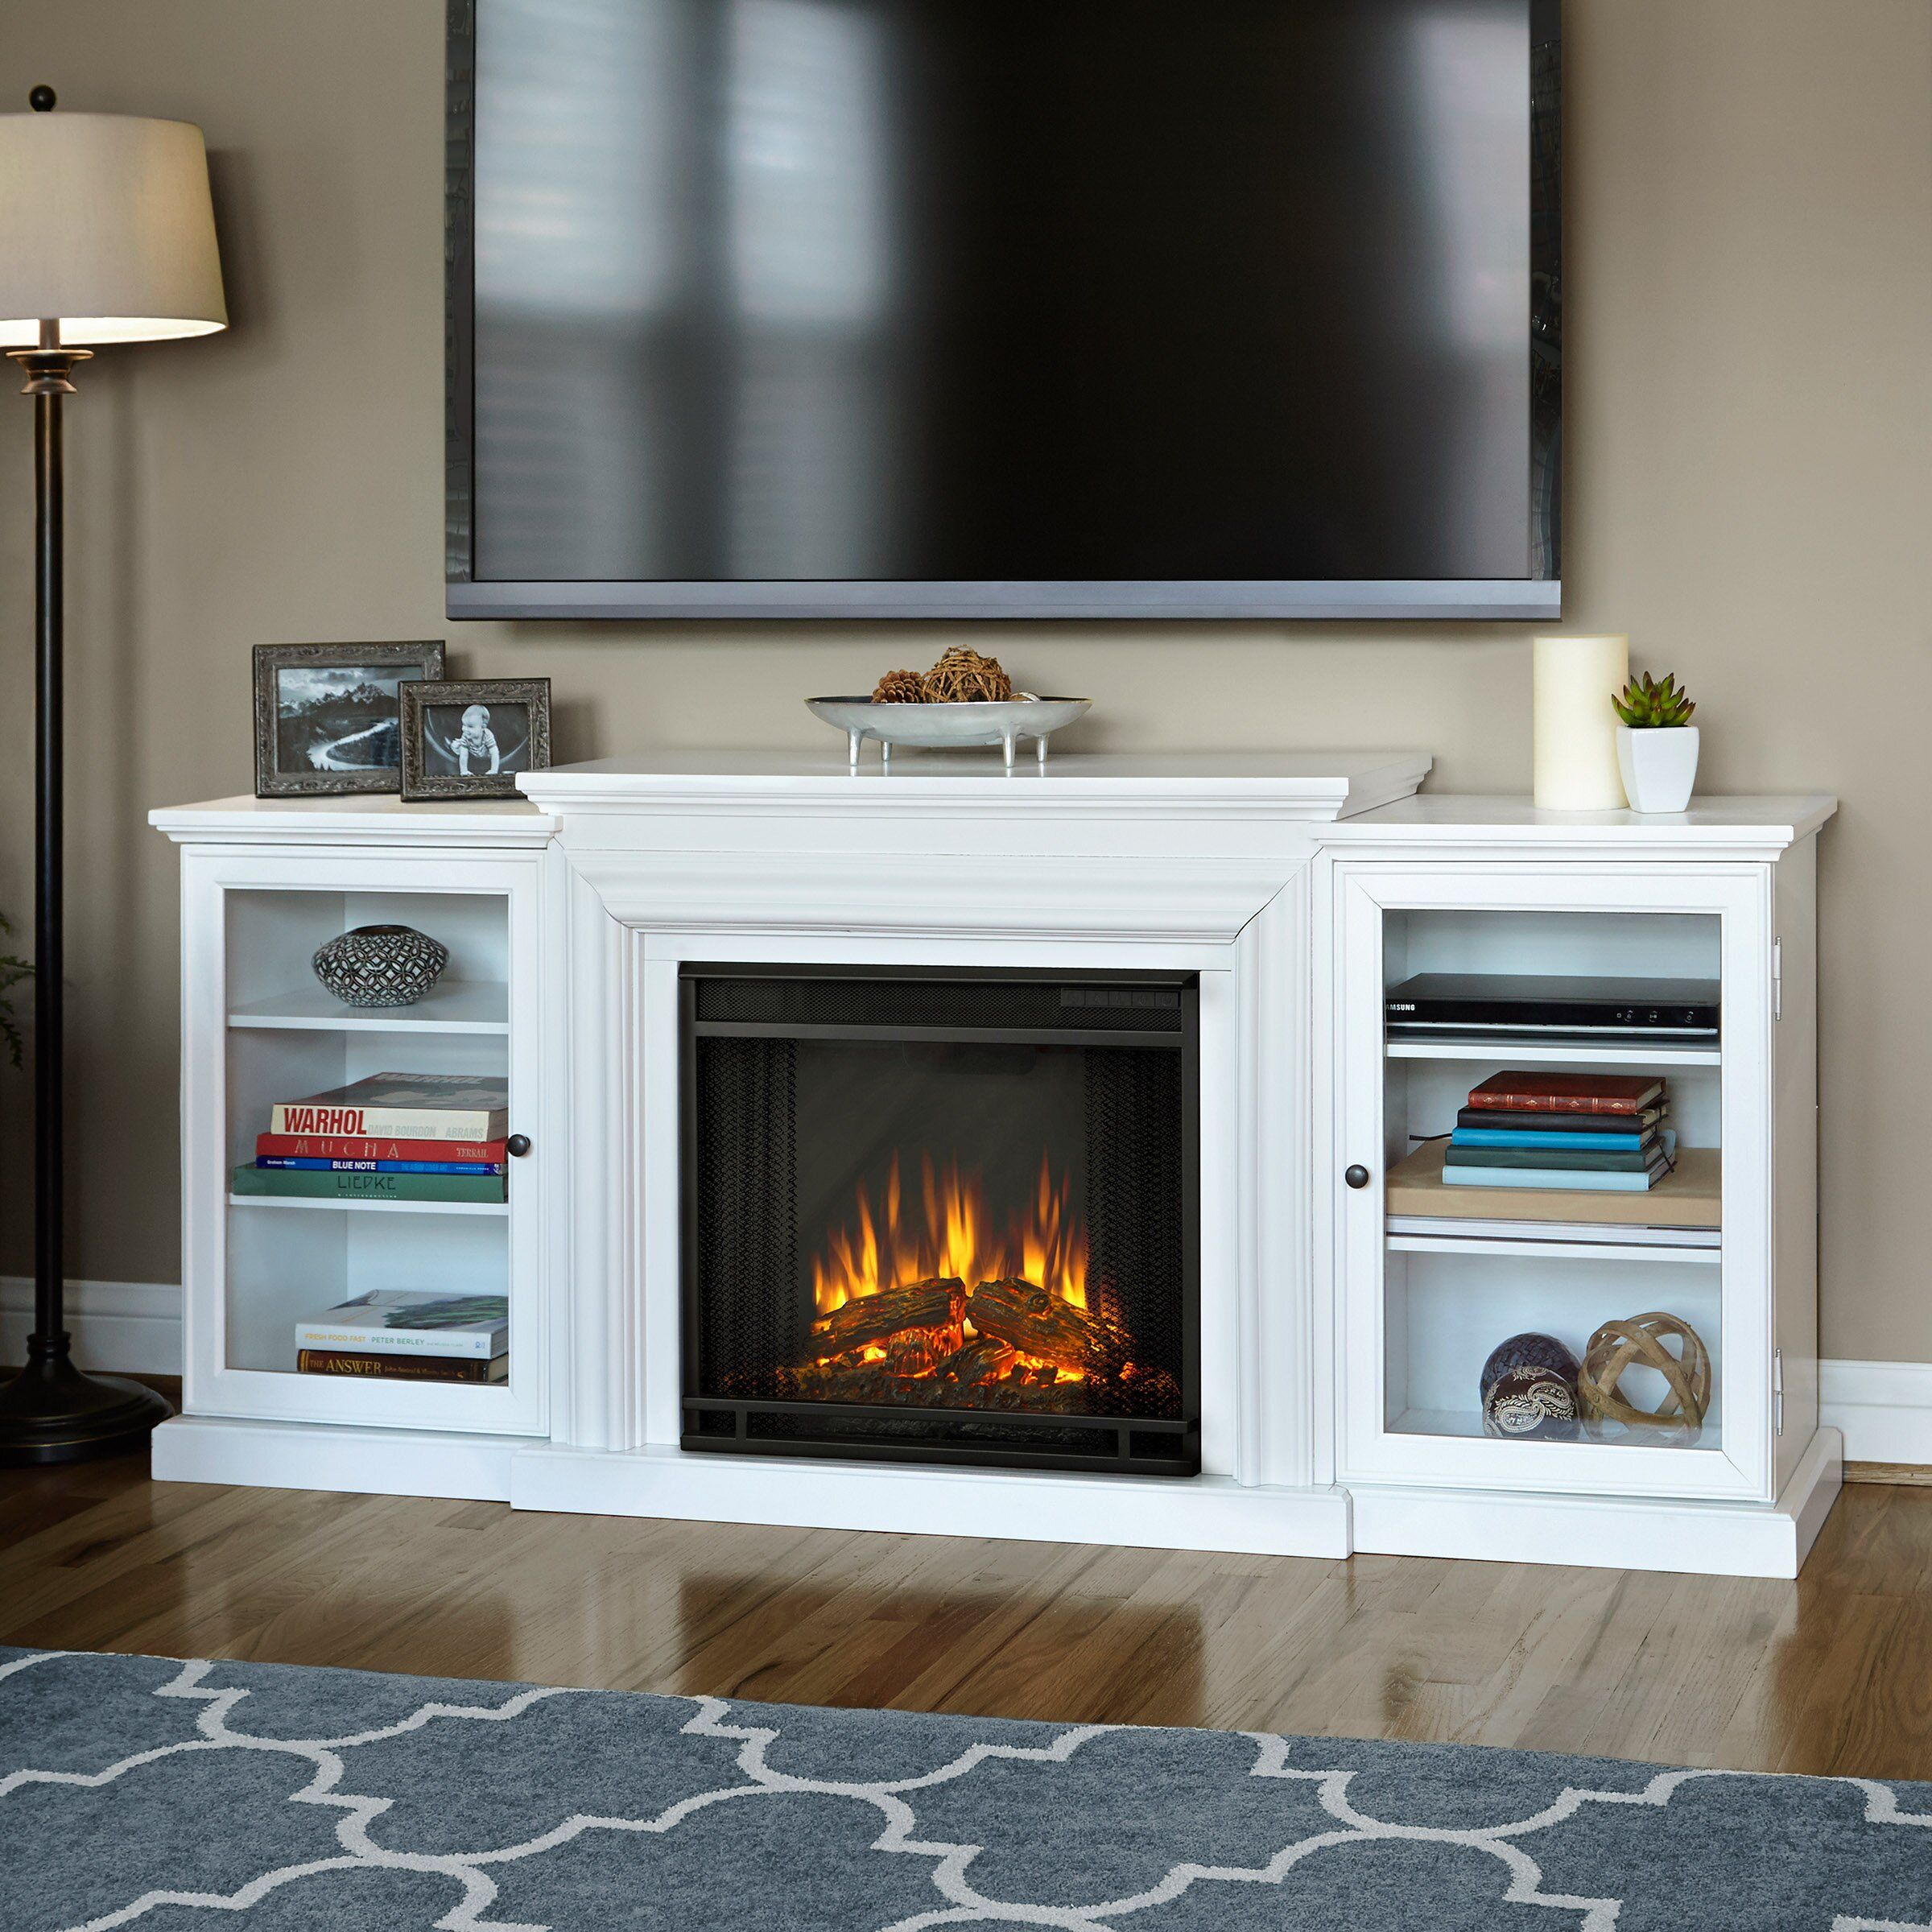 Real Flame Frederick Tv Stand With Electric Fireplace & Reviews | Wayfair Within Tv Stands With Electric Fireplace (View 4 of 20)